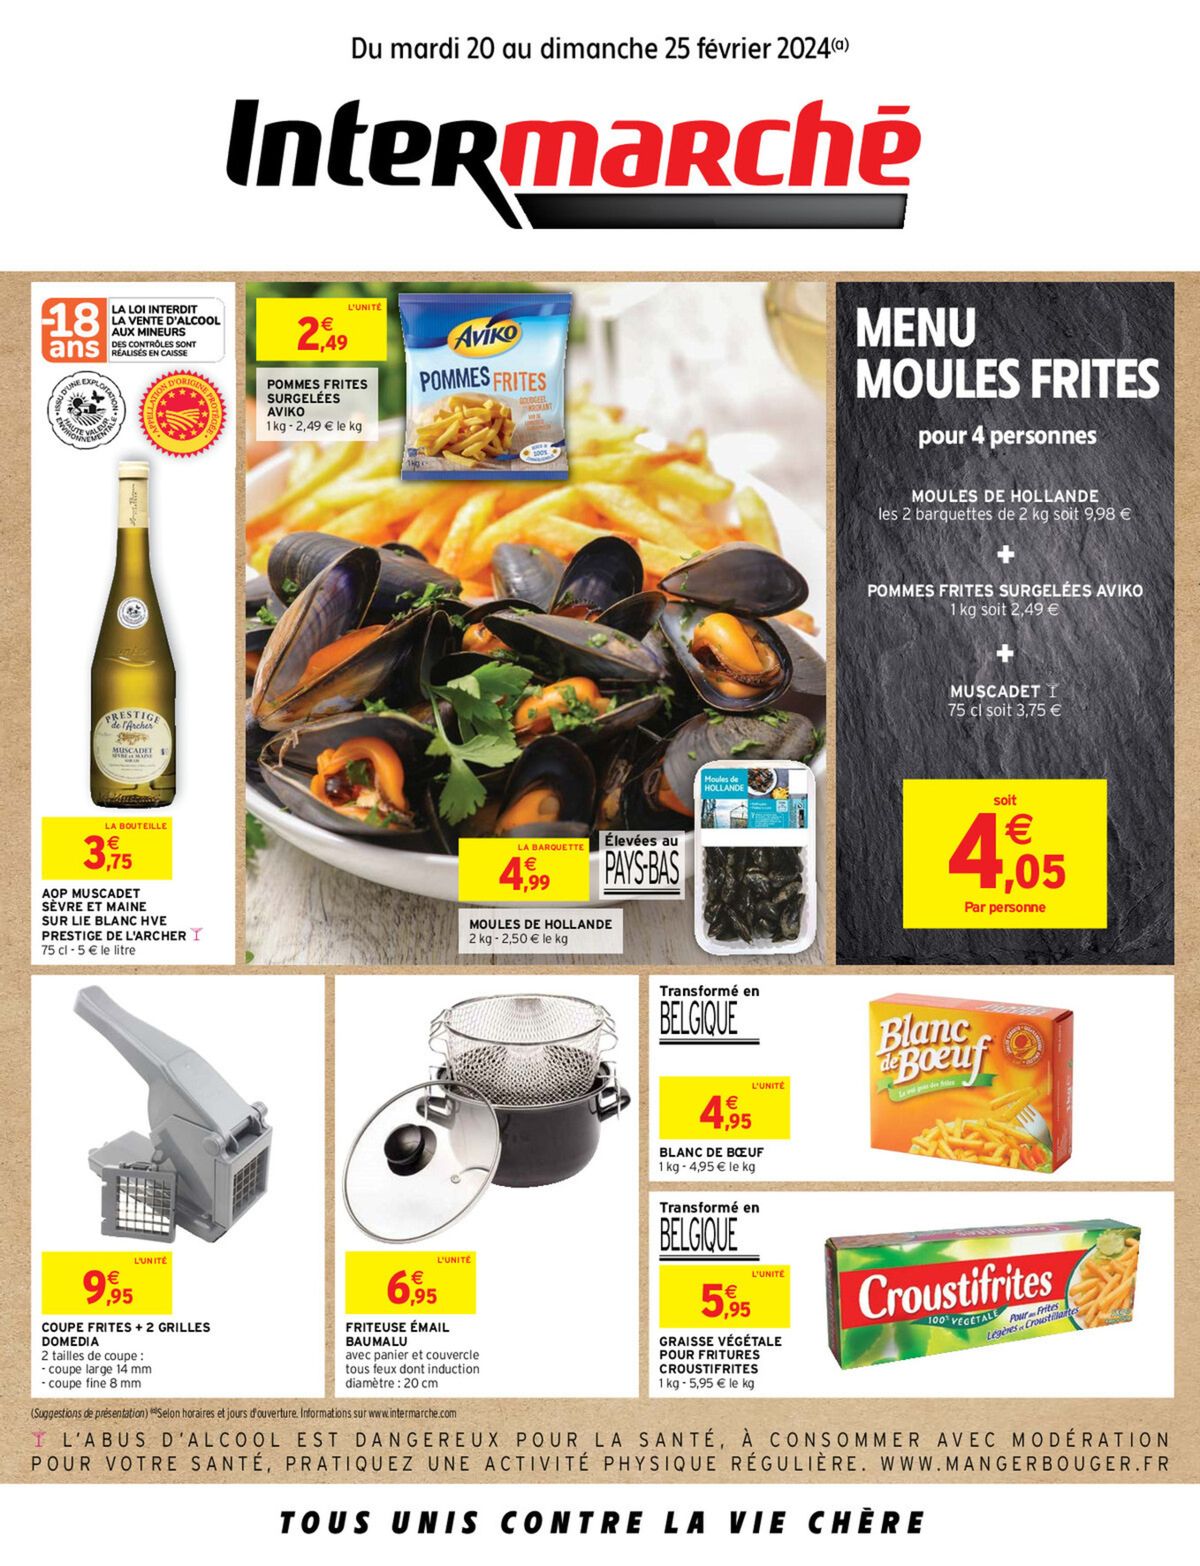 Catalogue MOULES FRITES, page 00001